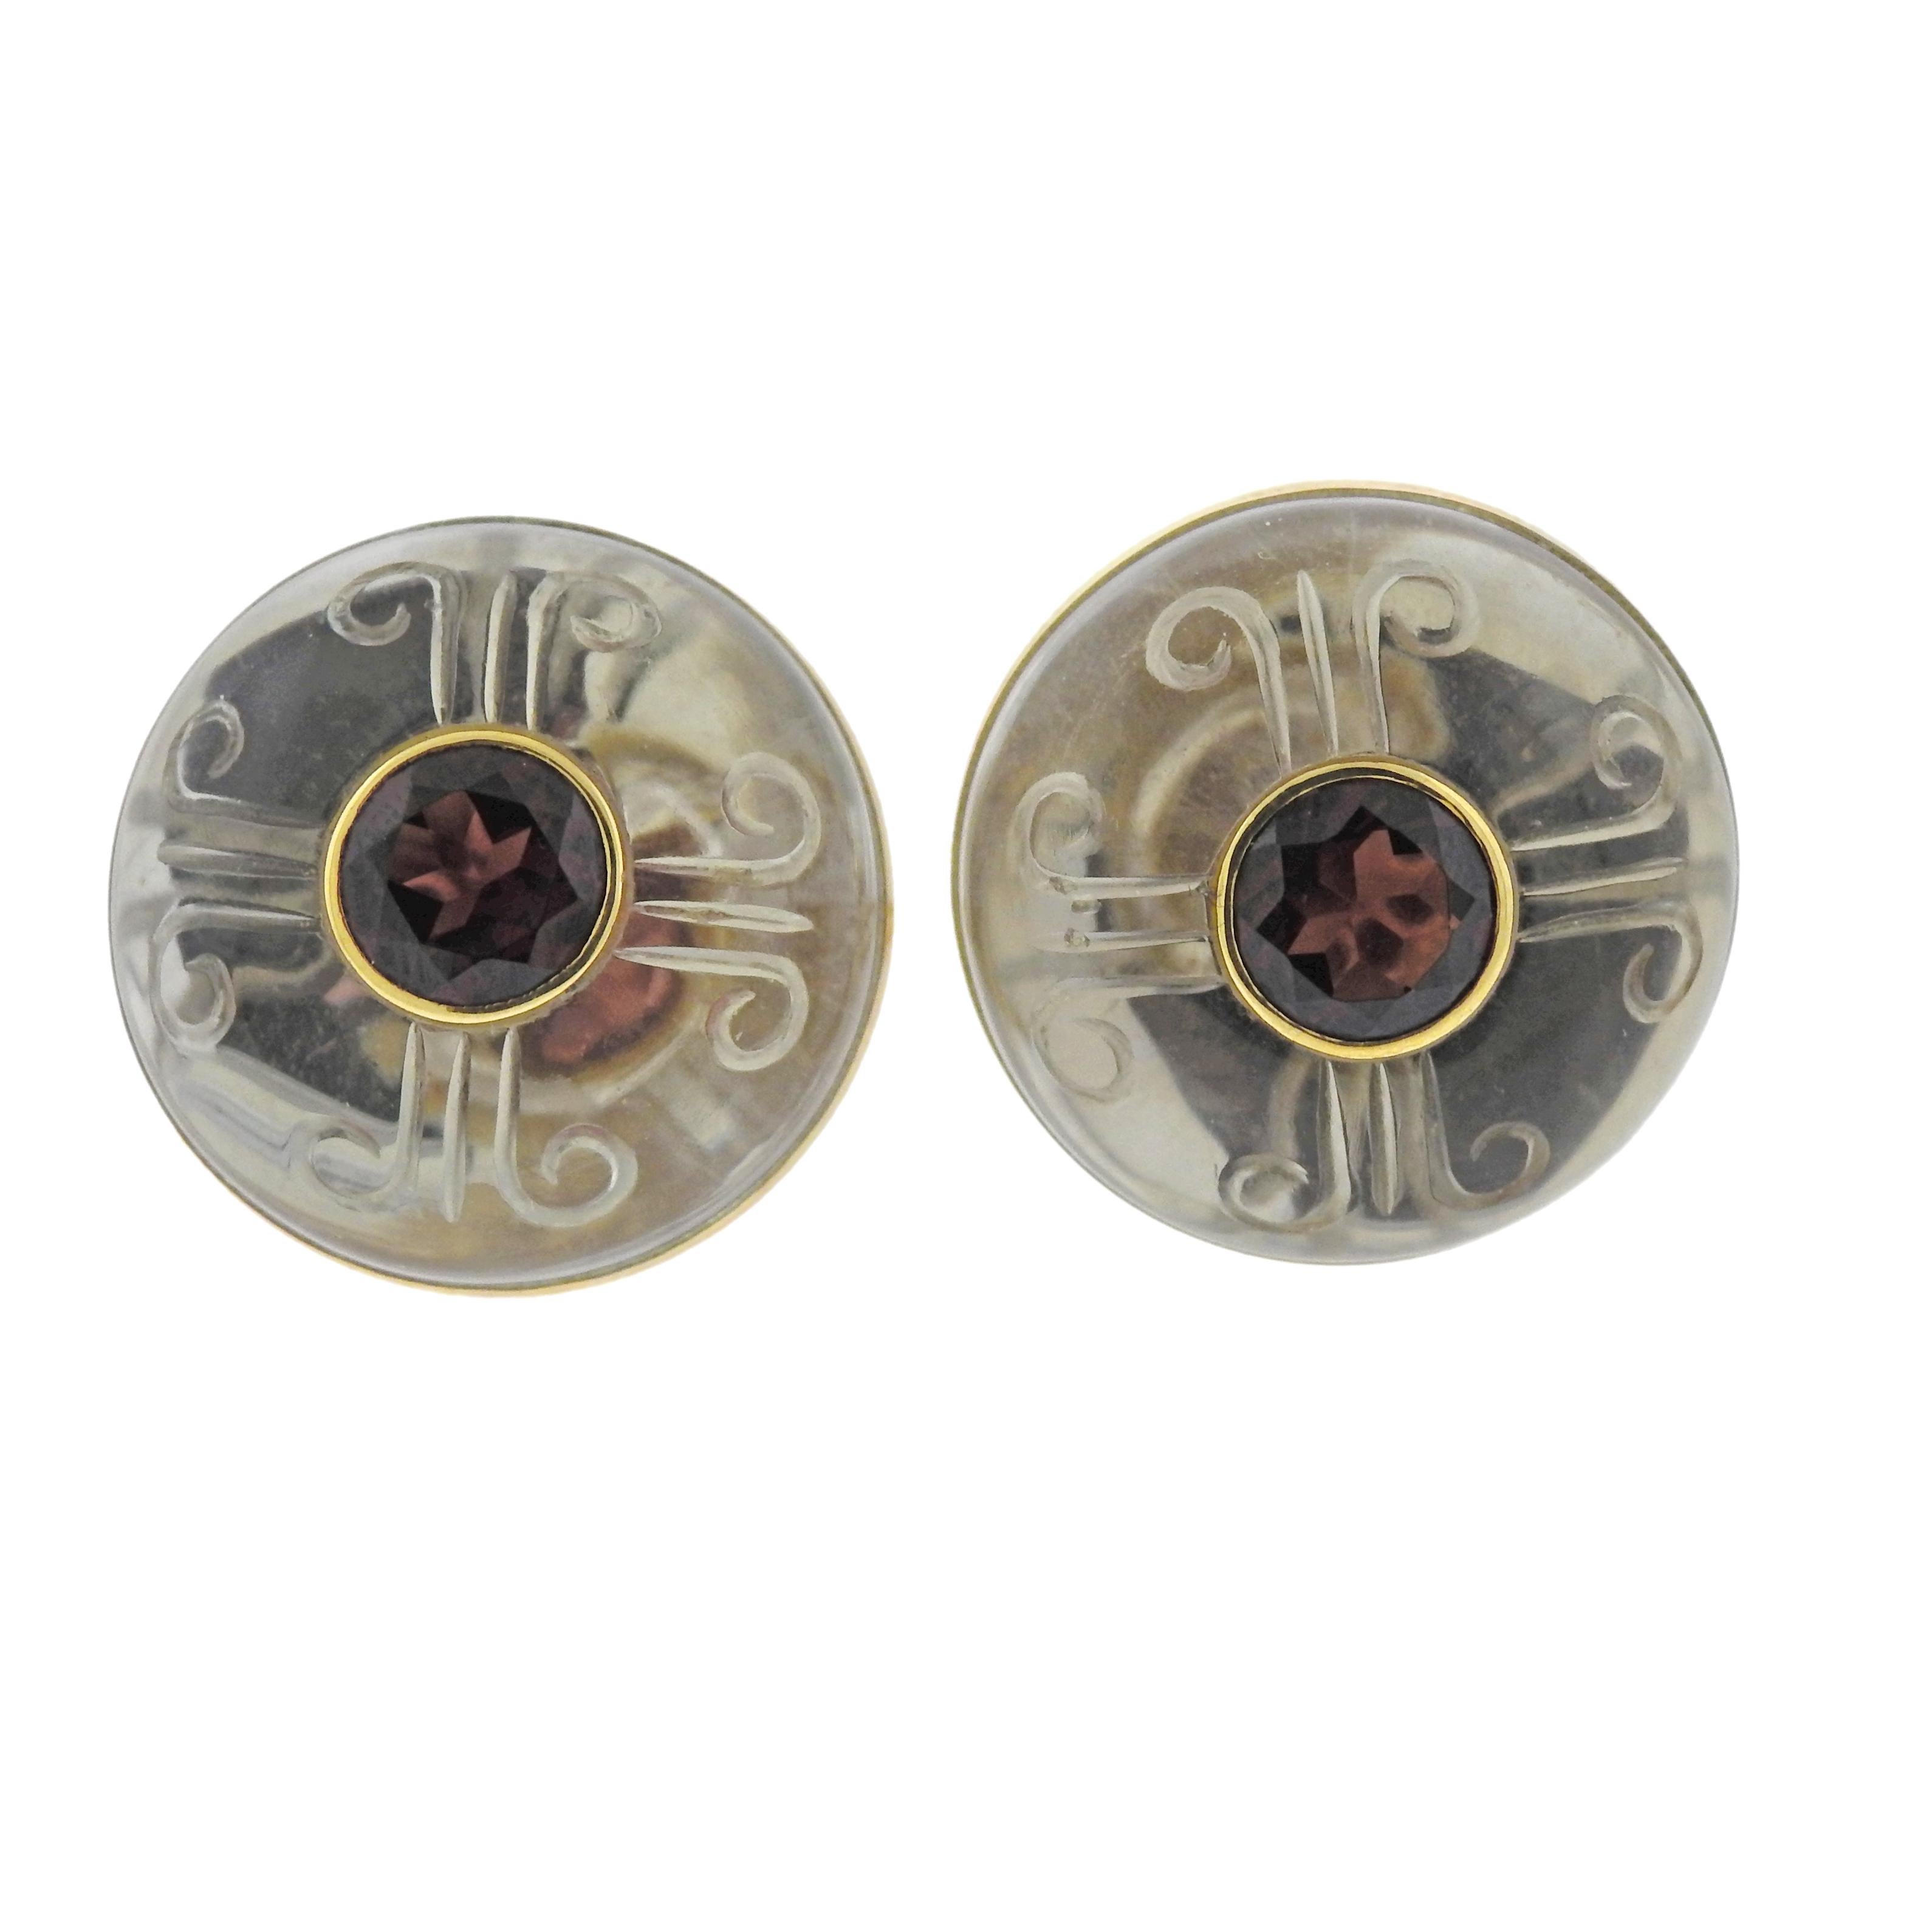 18k yellow gold Trianon earrings, featuring orange/red gemstones in the center and carved crystal top. Earrings are 24mm in diameter , weigh 25.8 grams. Marked: Trianon 750, 32816.